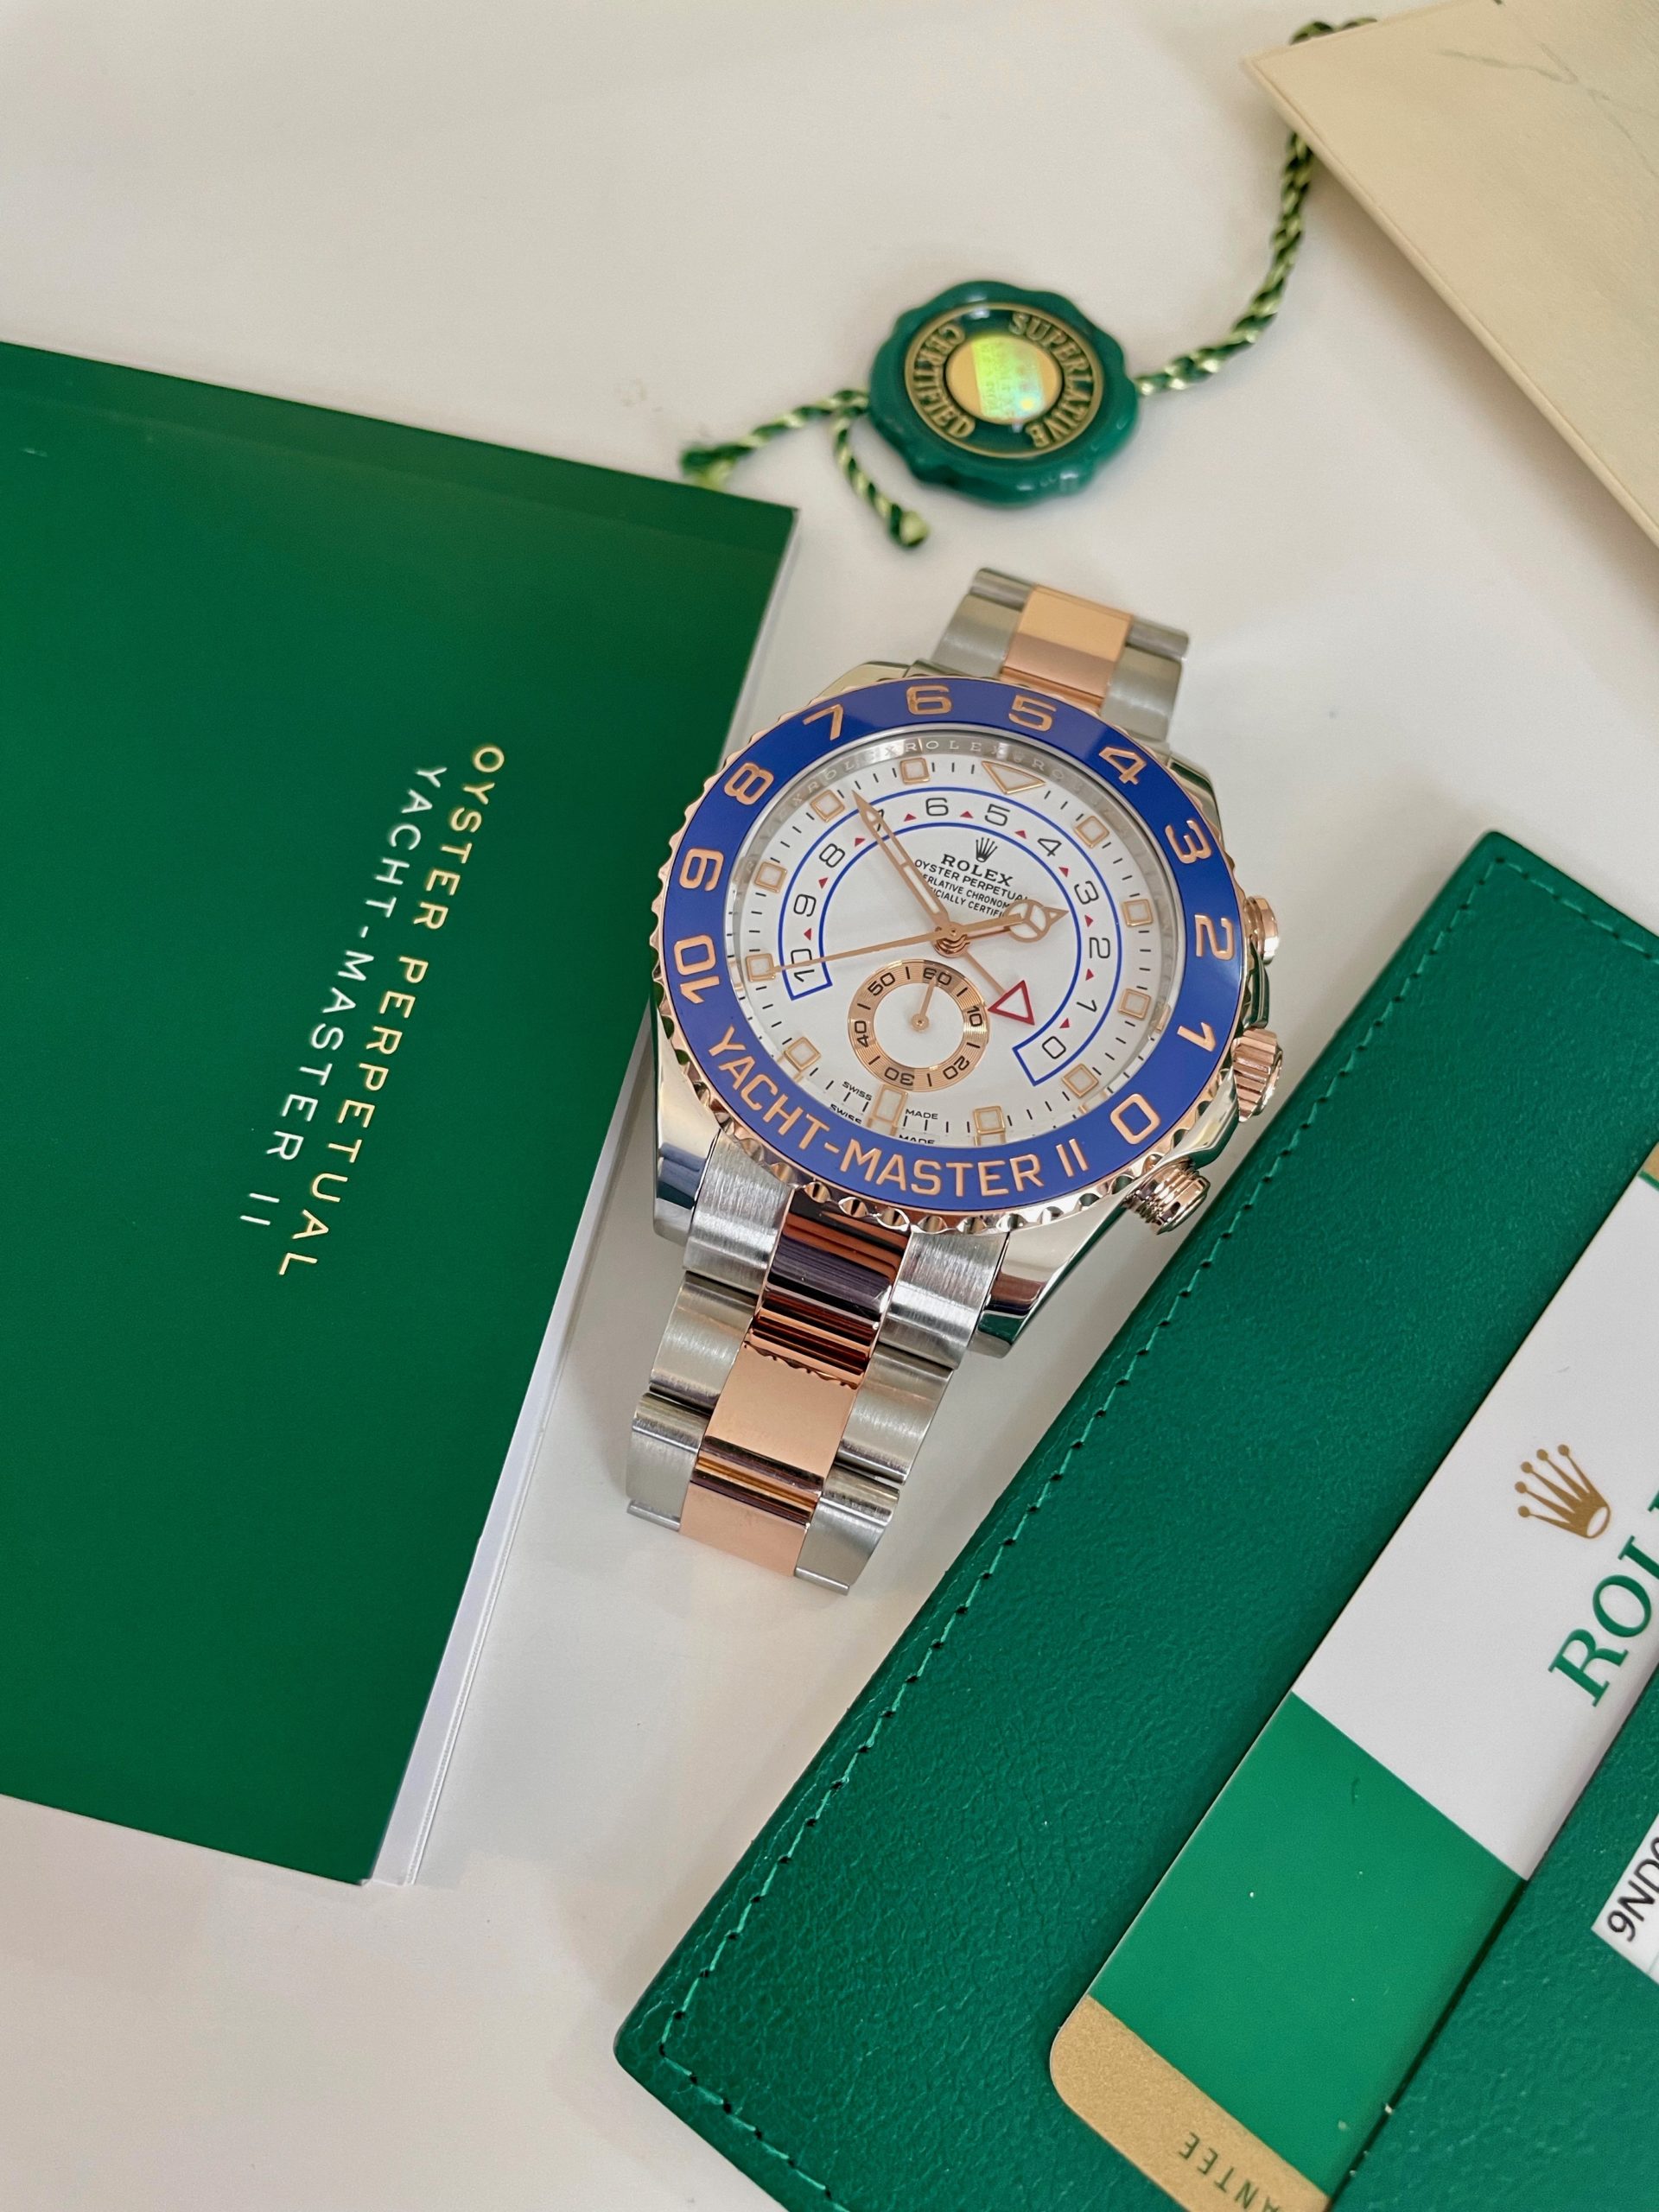 The Rolex Yacht-Master II Models